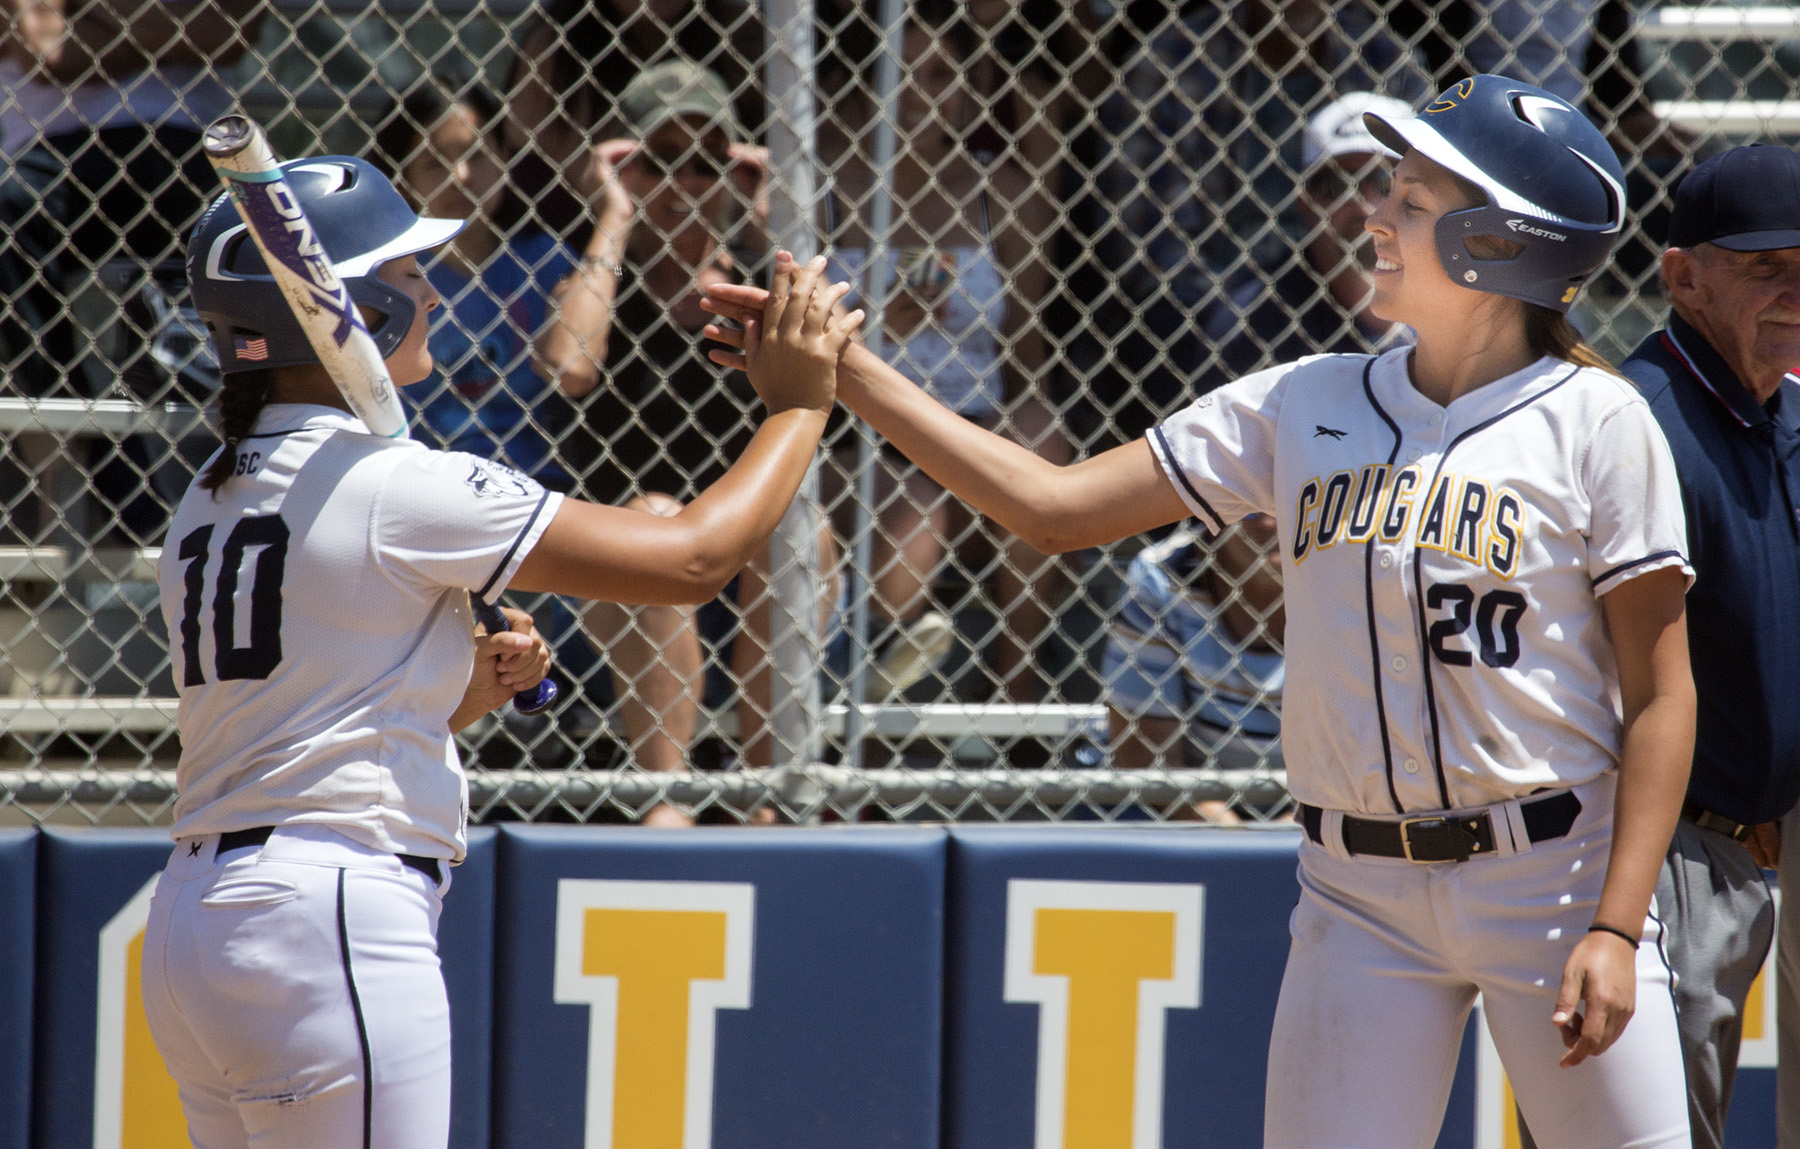 College of the Canyons sophomore Micayla Aguilar (20) is congratulated by teammate Camryn Webb (10) after breaking up Fullerton pitcher Jessica Lopez' no-hitter in the fifth inning of Saturday's elimination game. Jim McCormack/Fullerton College Athletics.